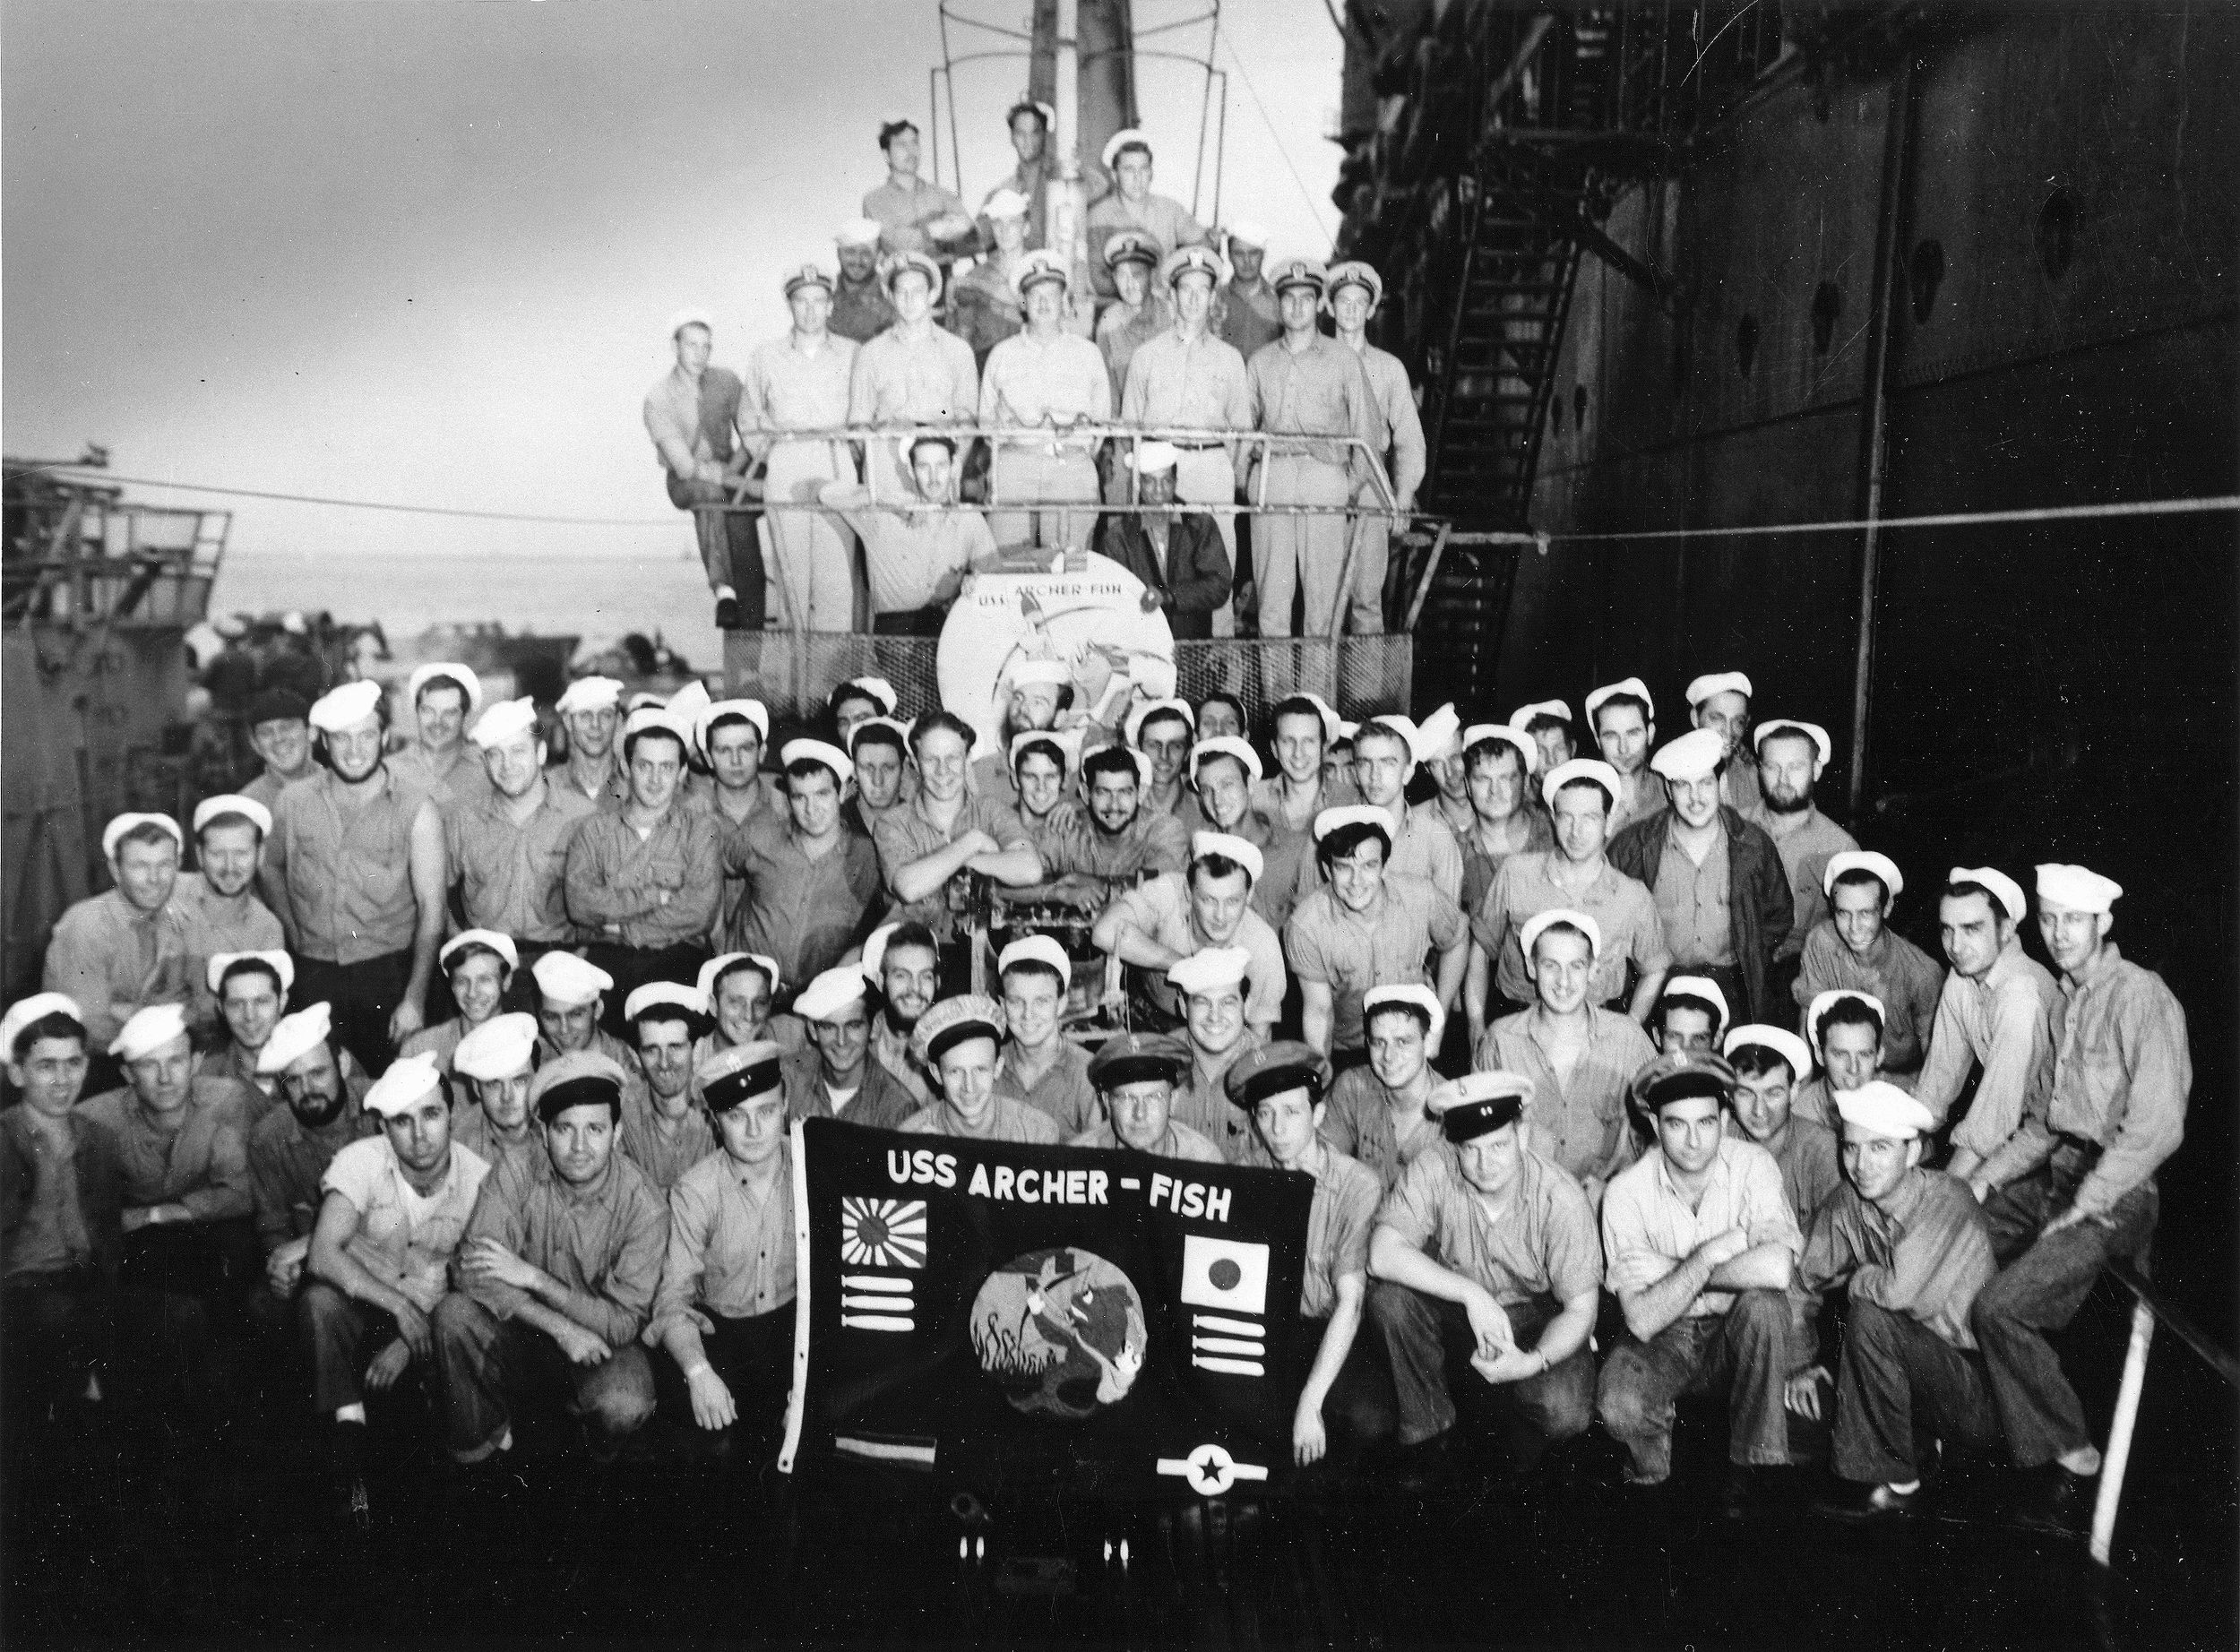 The crew of the USS Archer-Fish poses with the submarine’s battle flag, which prominently displays its victories against Japanese naval vessels and merchant shipping. The Archer-Fish was moored in Tokyo Bay alongside the submarine tender USS Proteus when this photograph was taken on September 1, 1945. (U.S. Naval Historical Center Photograph)